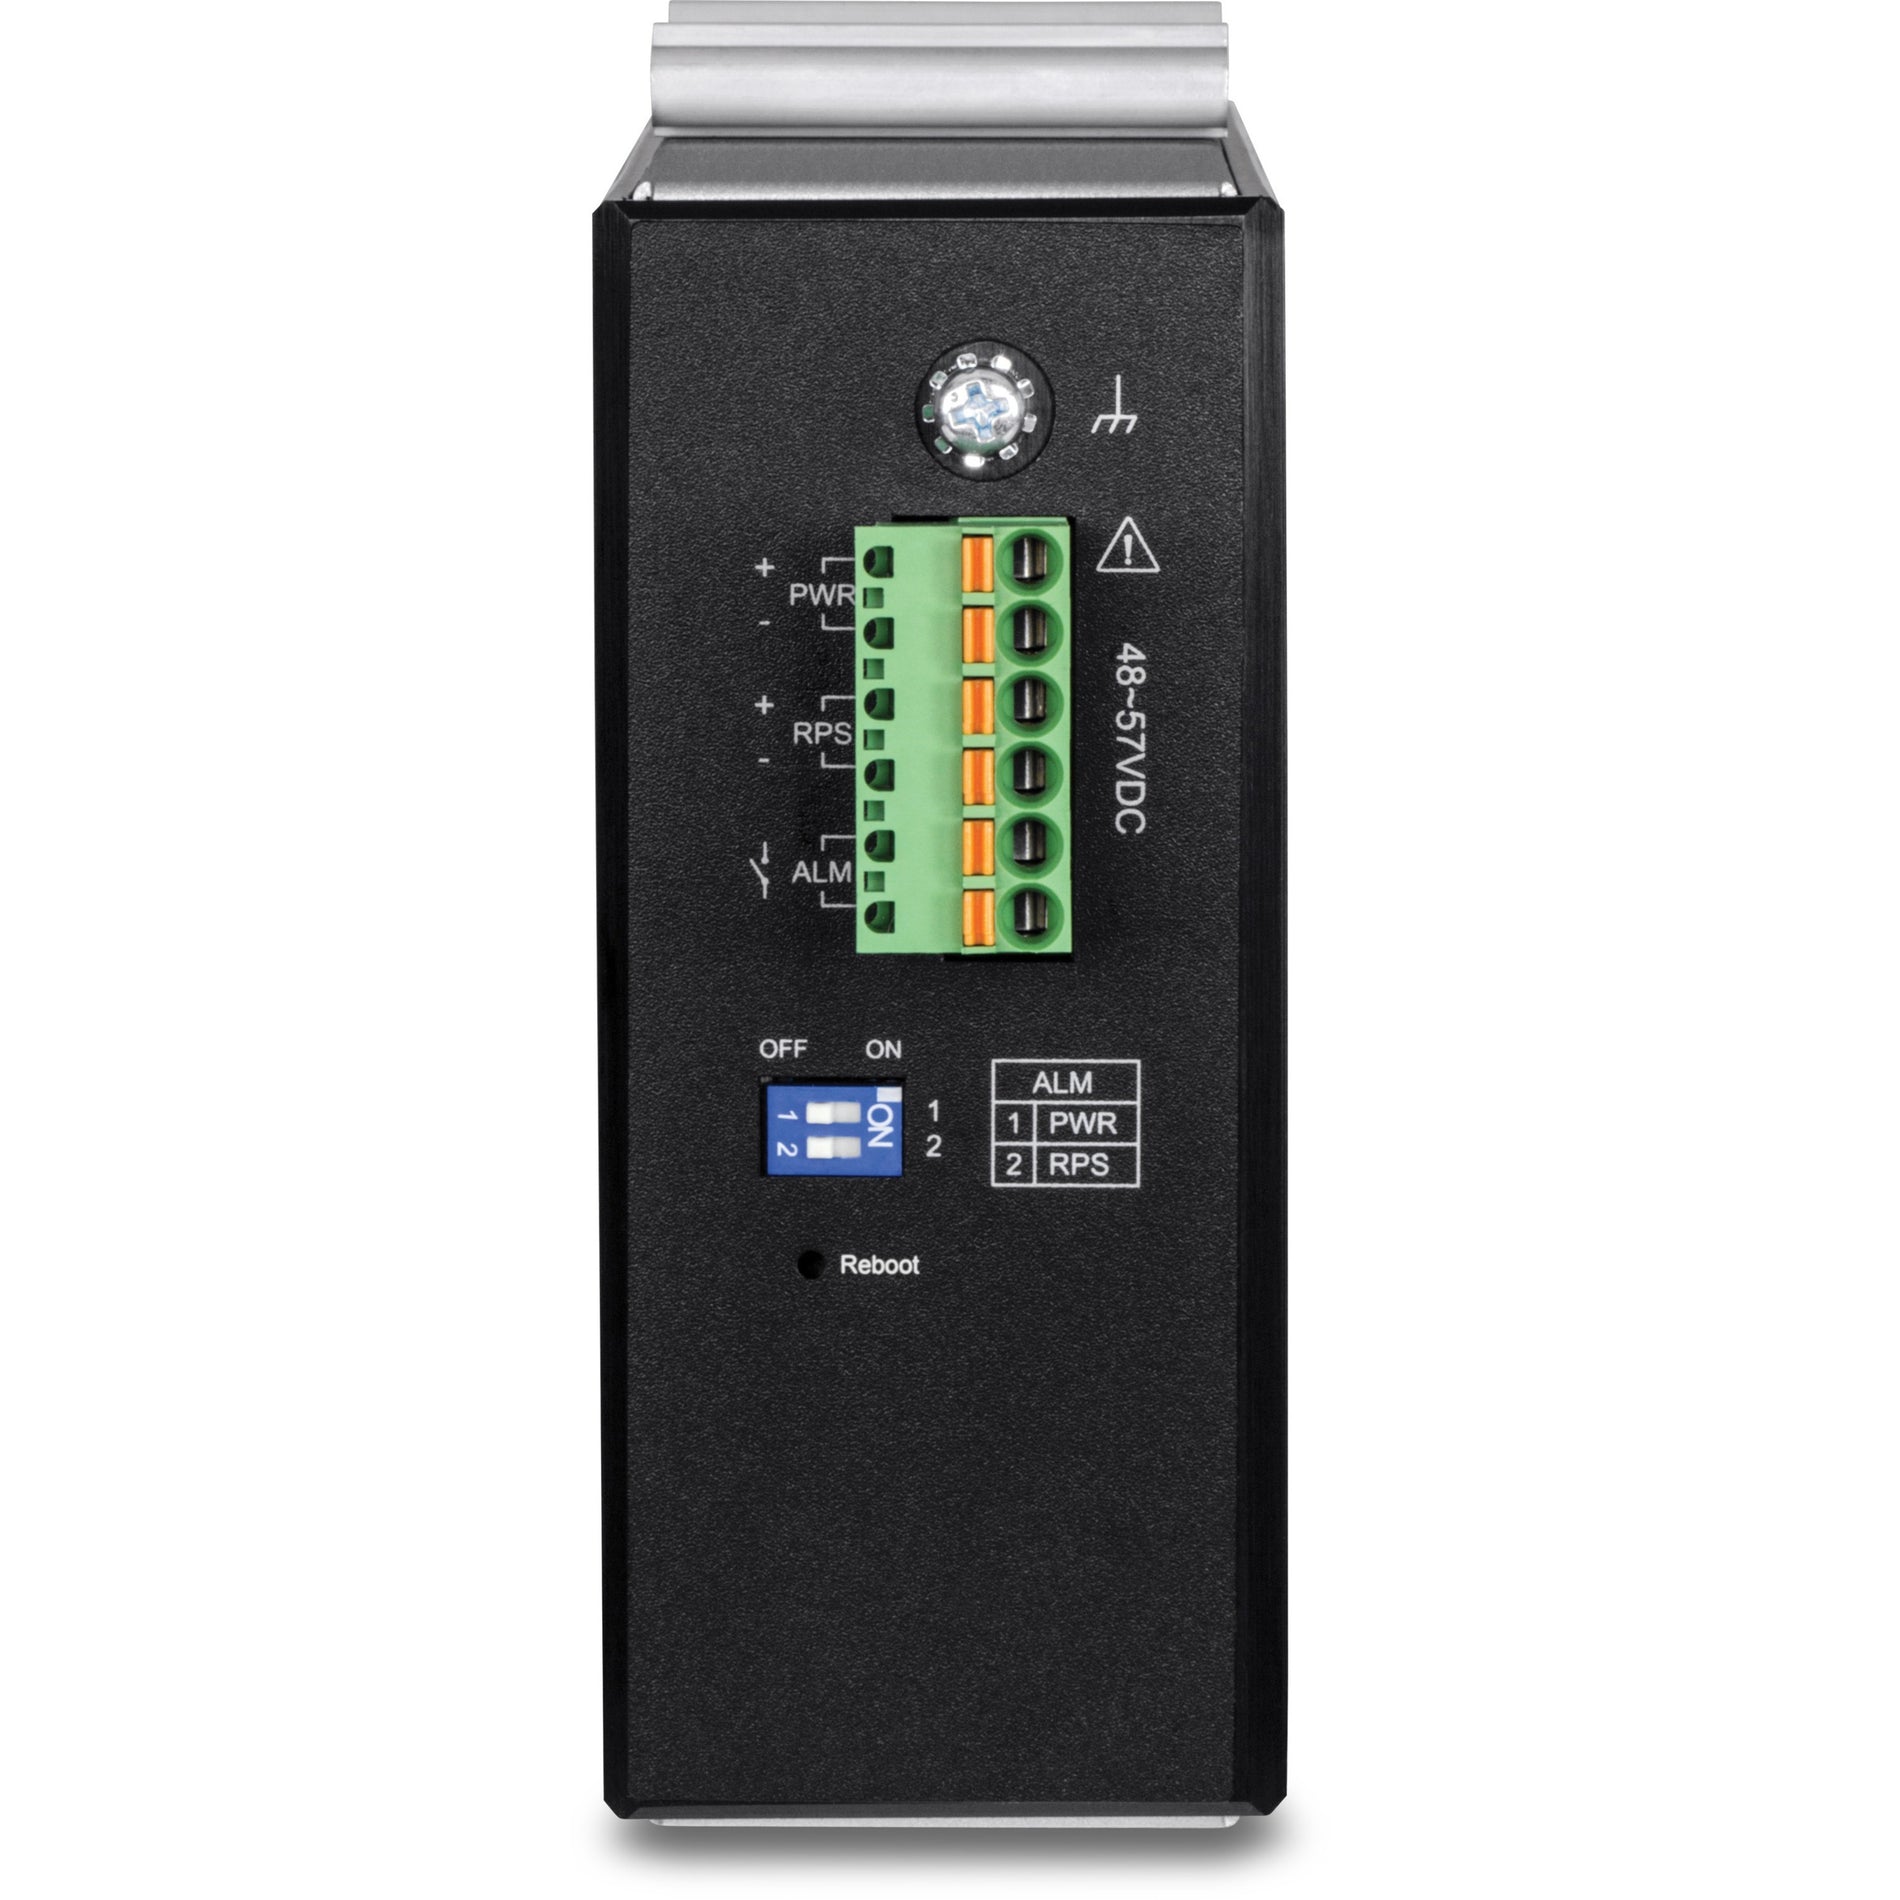 TRENDnet TI-PG1284i 12-port Hardened Industrial Gigabit PoE+ Layer 2+ Managed DIN-Rail Switch, Lifetime Warranty, TAA and NDAA Compliant